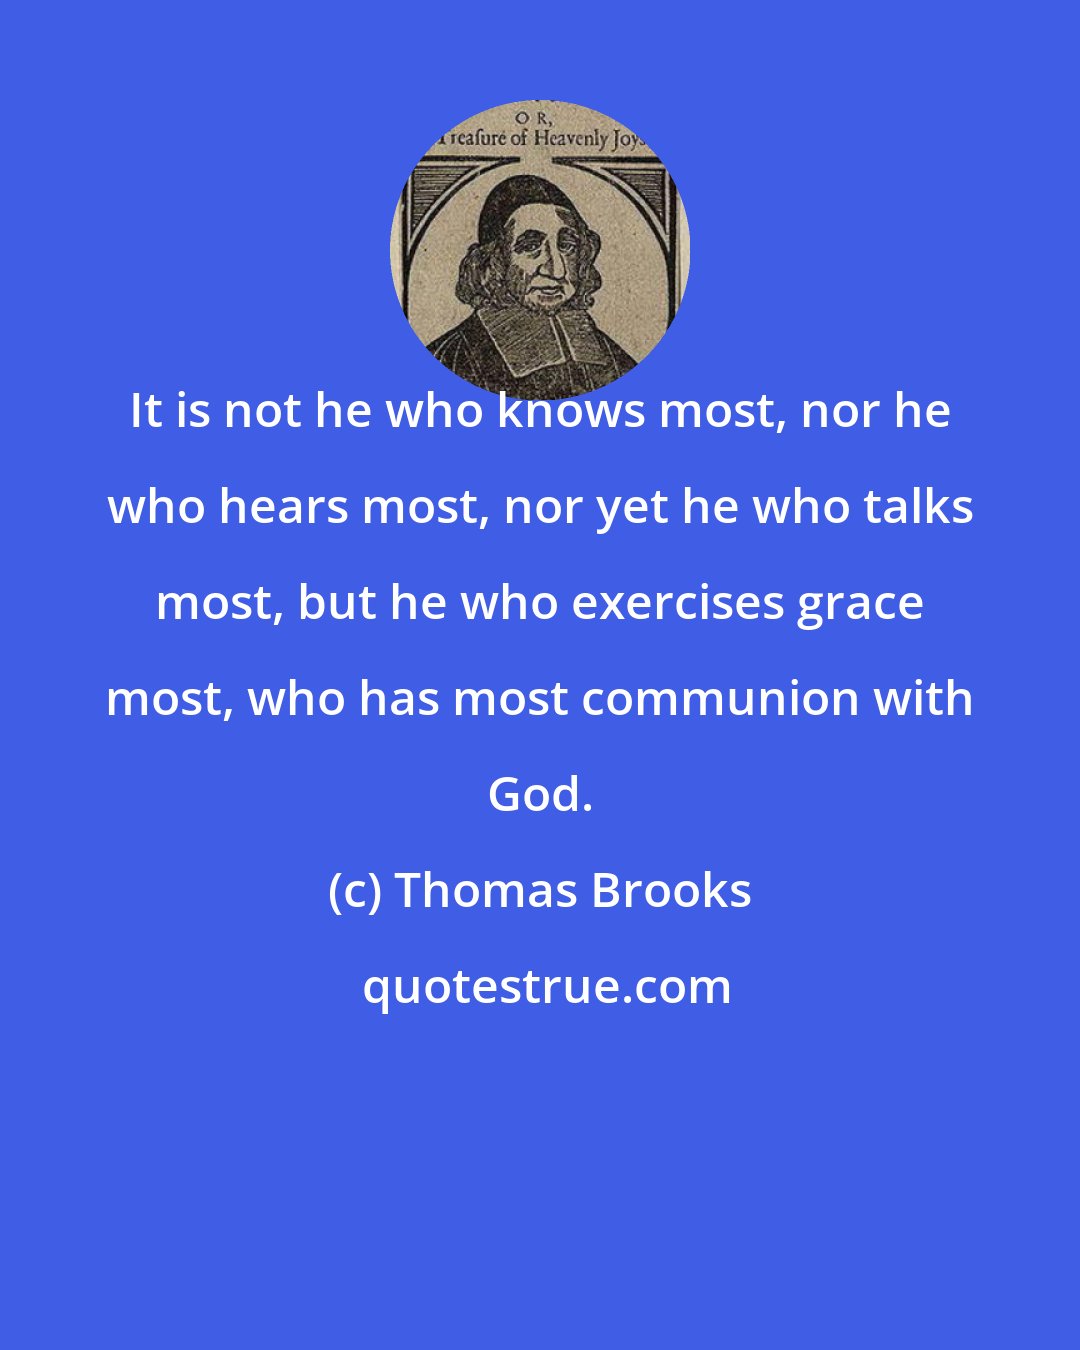 Thomas Brooks: It is not he who knows most, nor he who hears most, nor yet he who talks most, but he who exercises grace most, who has most communion with God.